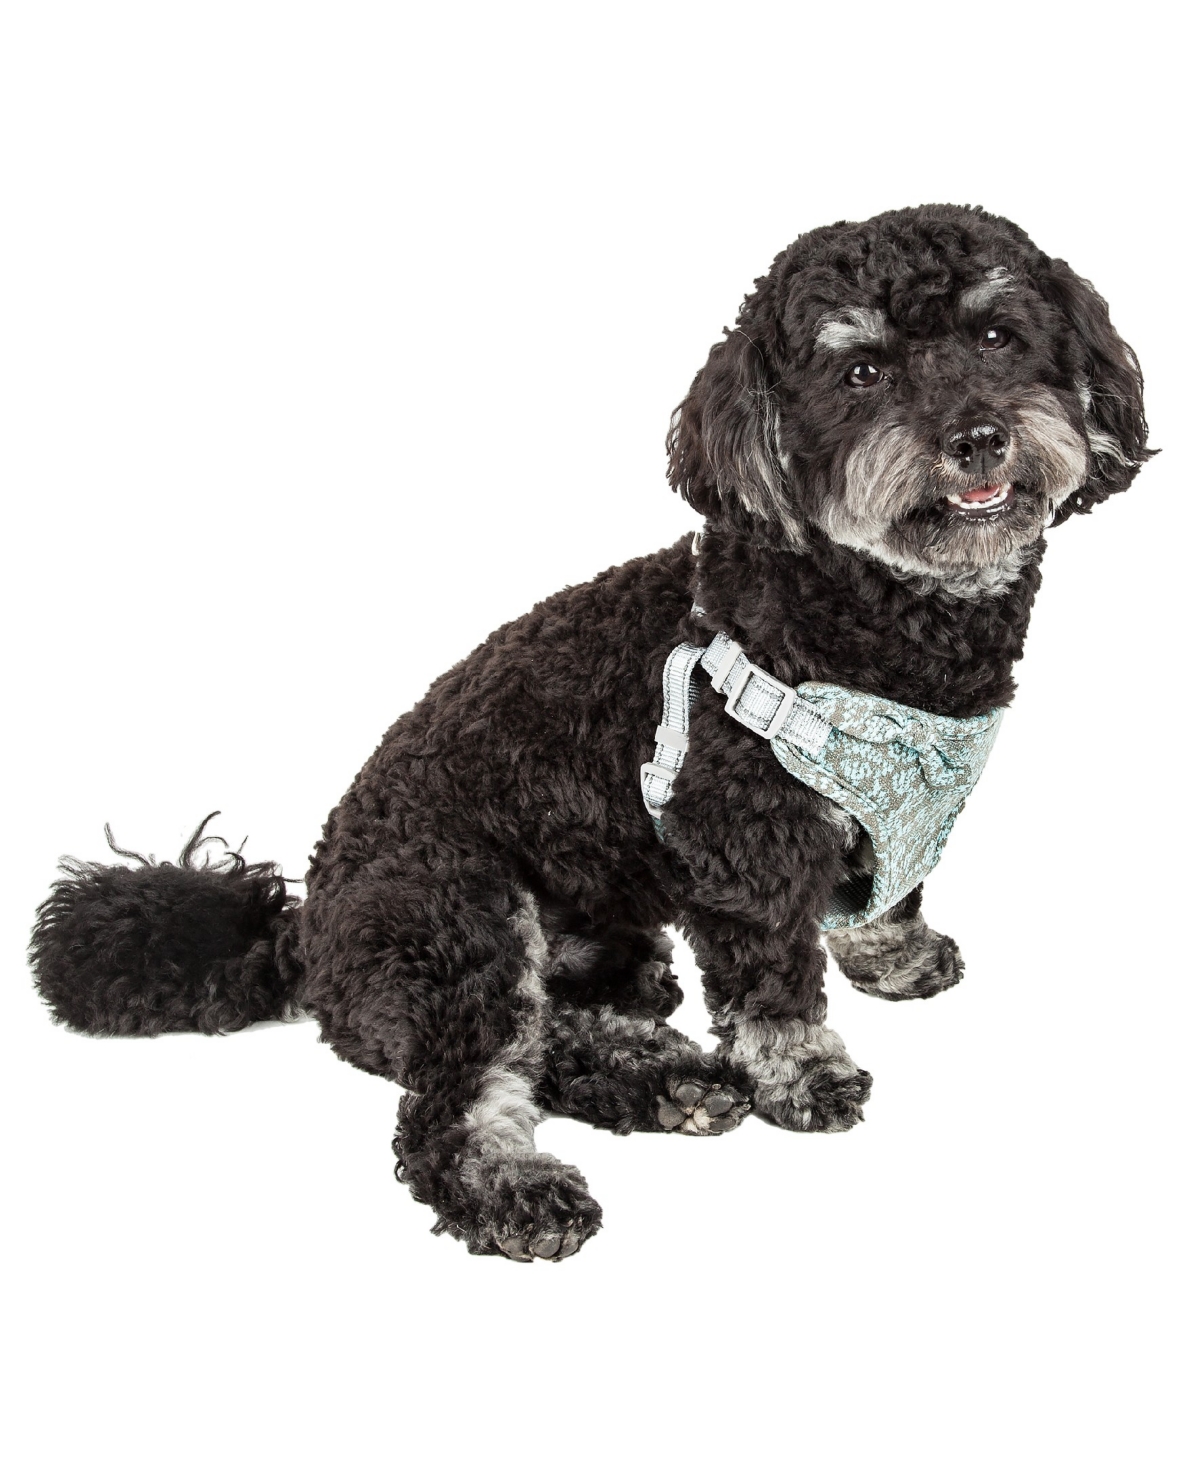 'Fidomite' Reversible and Adjustable Dog Harness with Bowtie - Blue